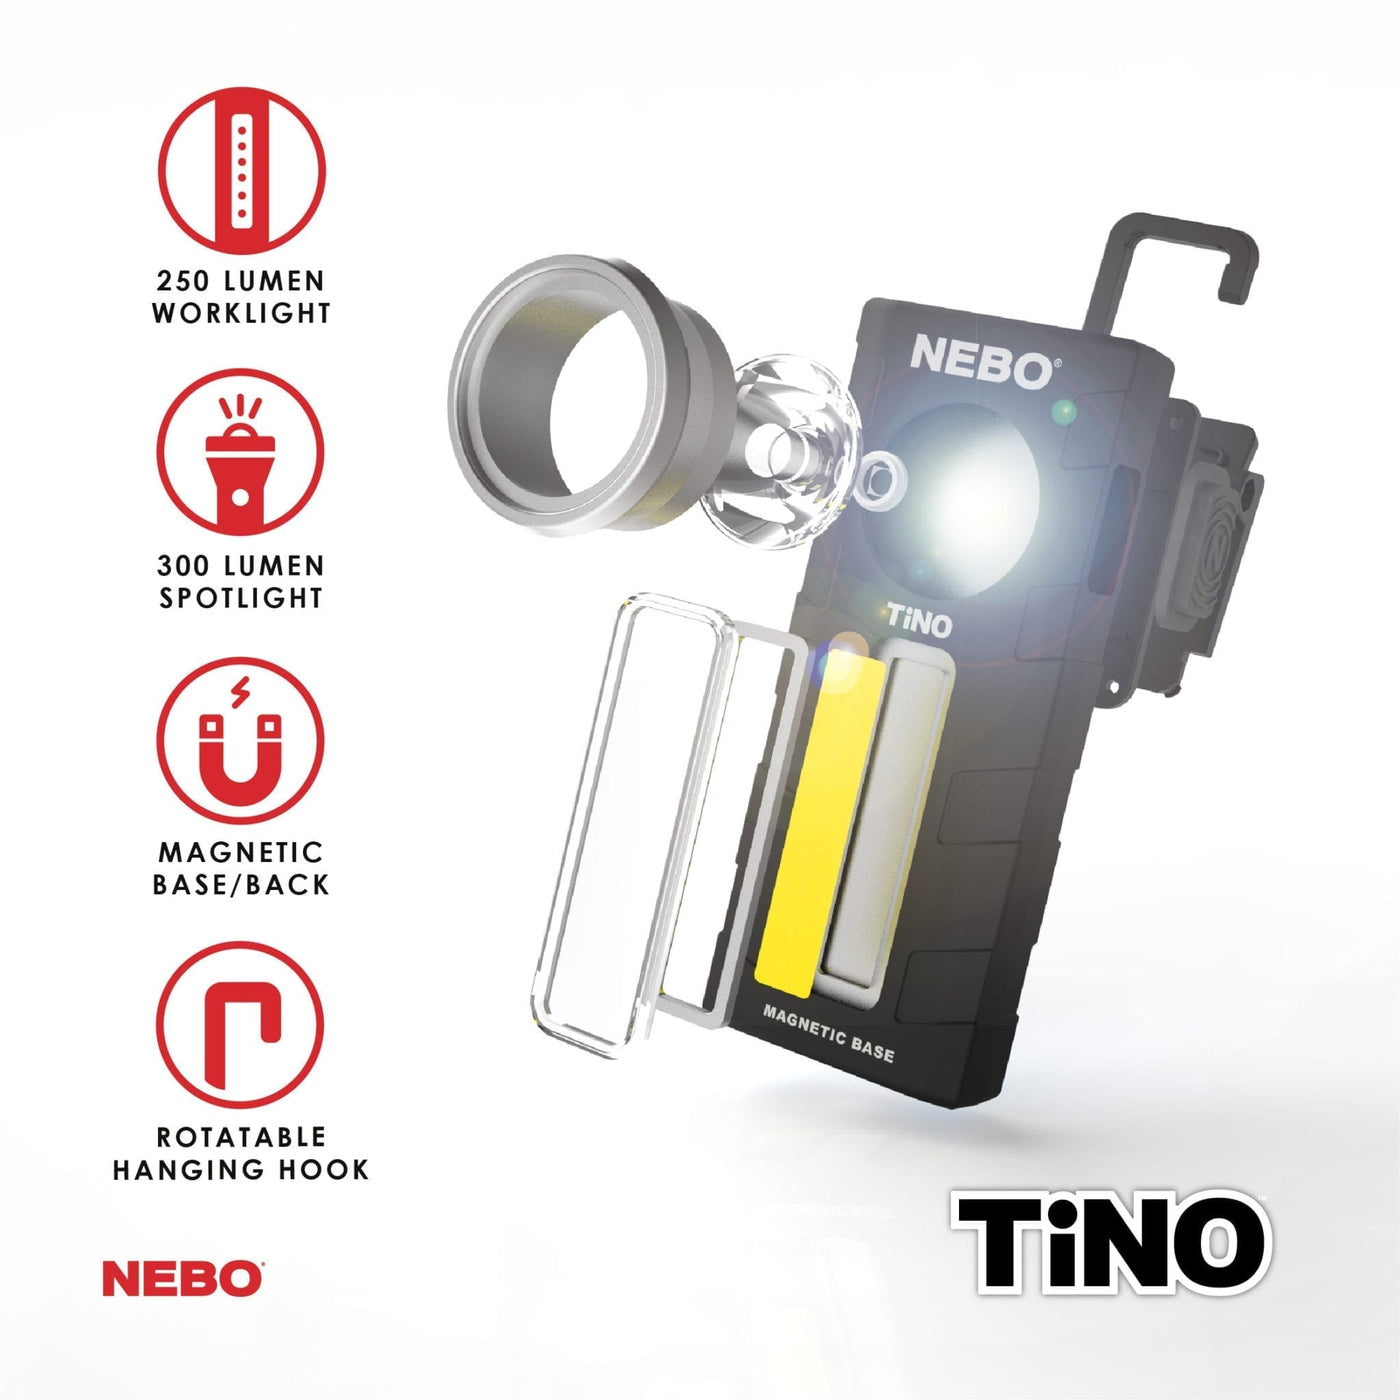 At Nebo Tools, we continually innovate so that we can offer the highest quality LED lighting products at the best price. The TiNO is a thin, ergonomic pocket light that features a 300 lumen spot light and a 250 lumen COB work light. Equipped with full dimming and Power Memory Recall, the TiNO also features a pocket clip, collapsible hanging hook and powerful magnetic base for convenient hands-free lighting.